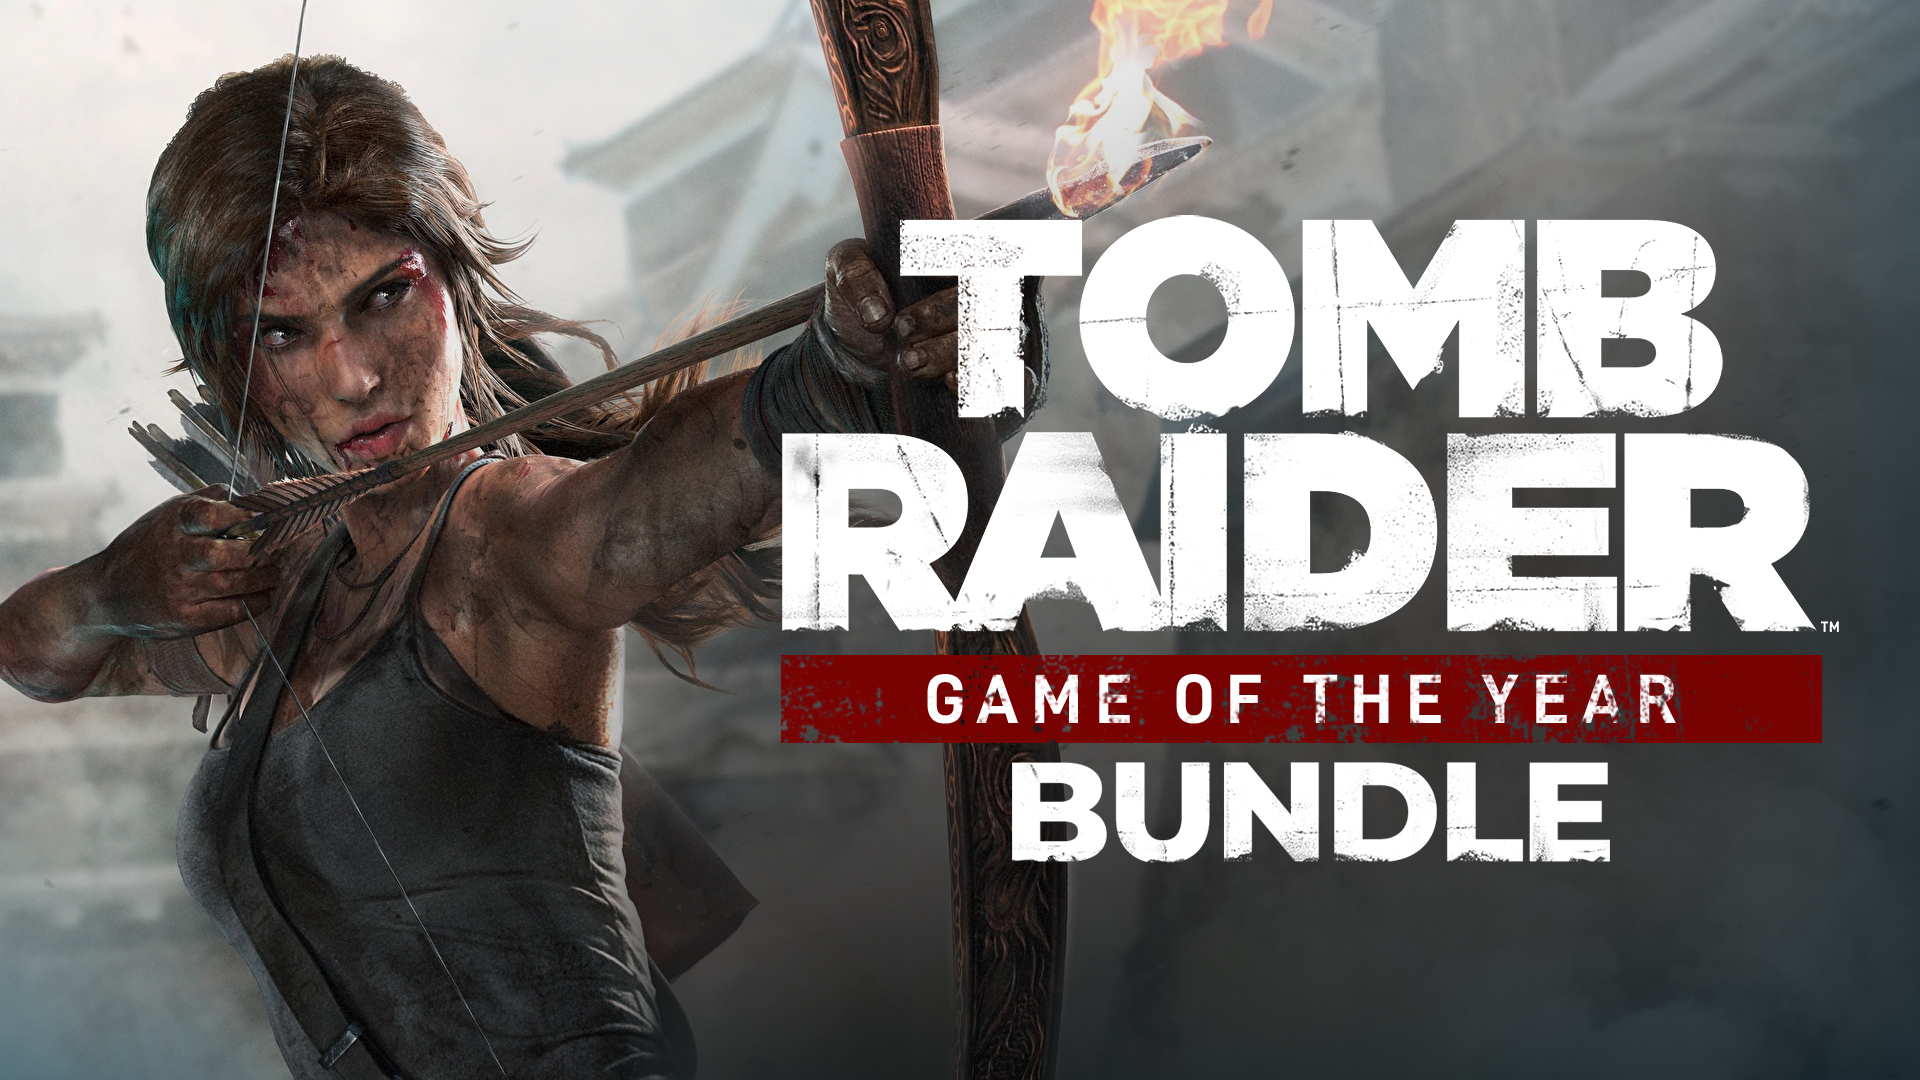 best selling tomb raider game